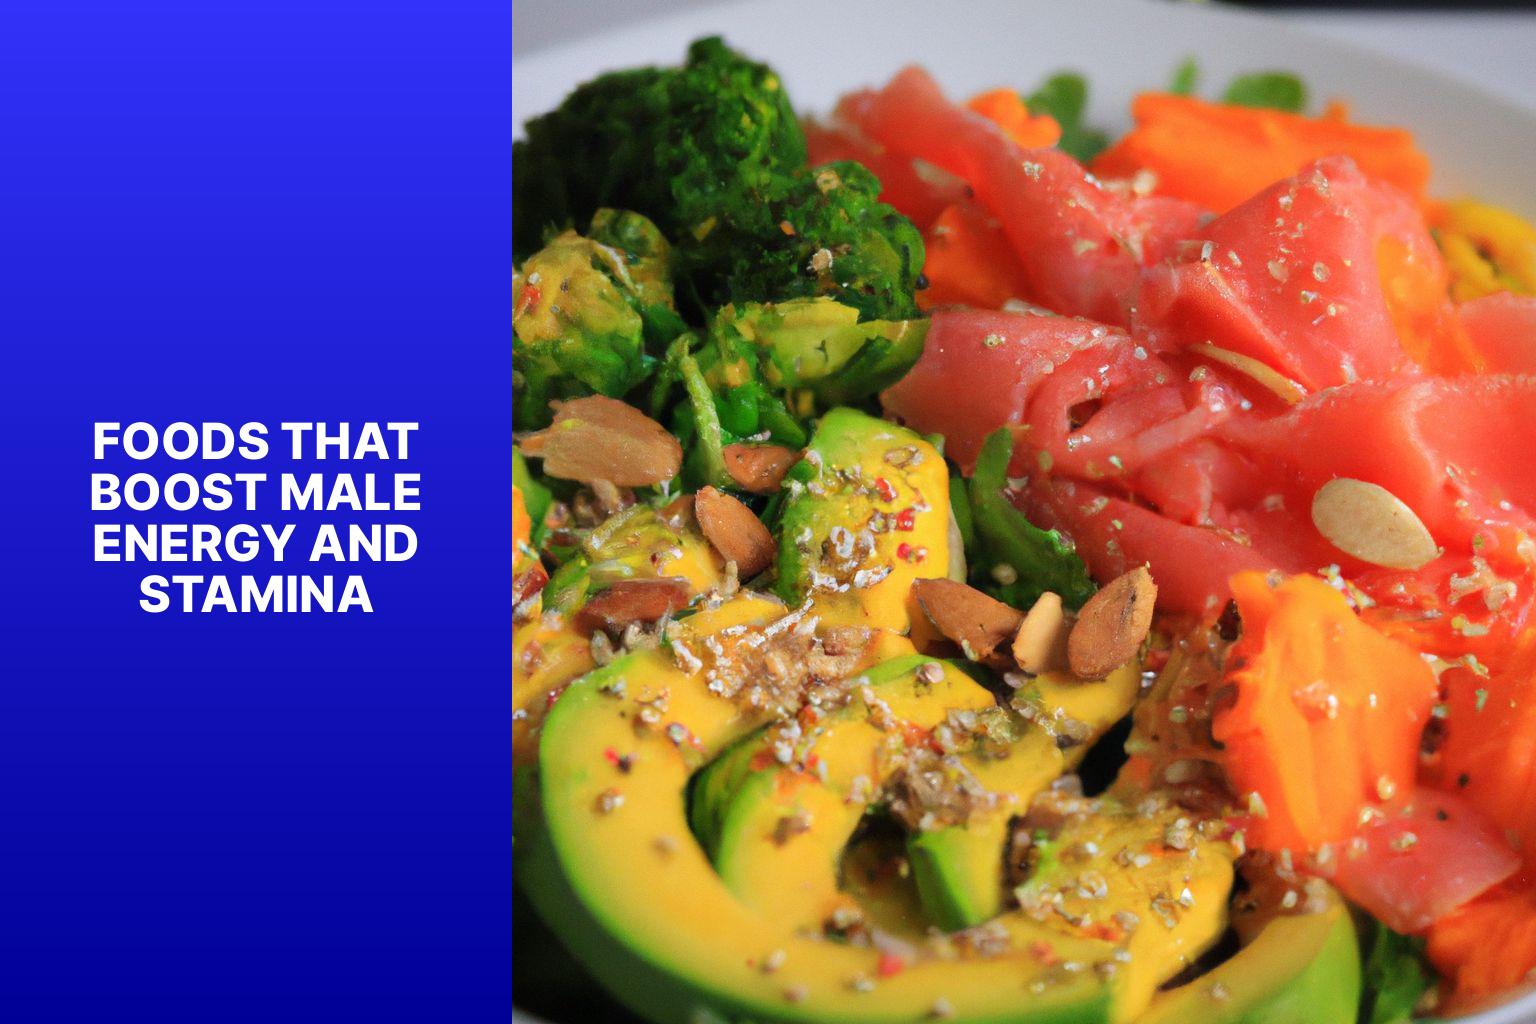 Foods that Boost Male Energy and Stamina